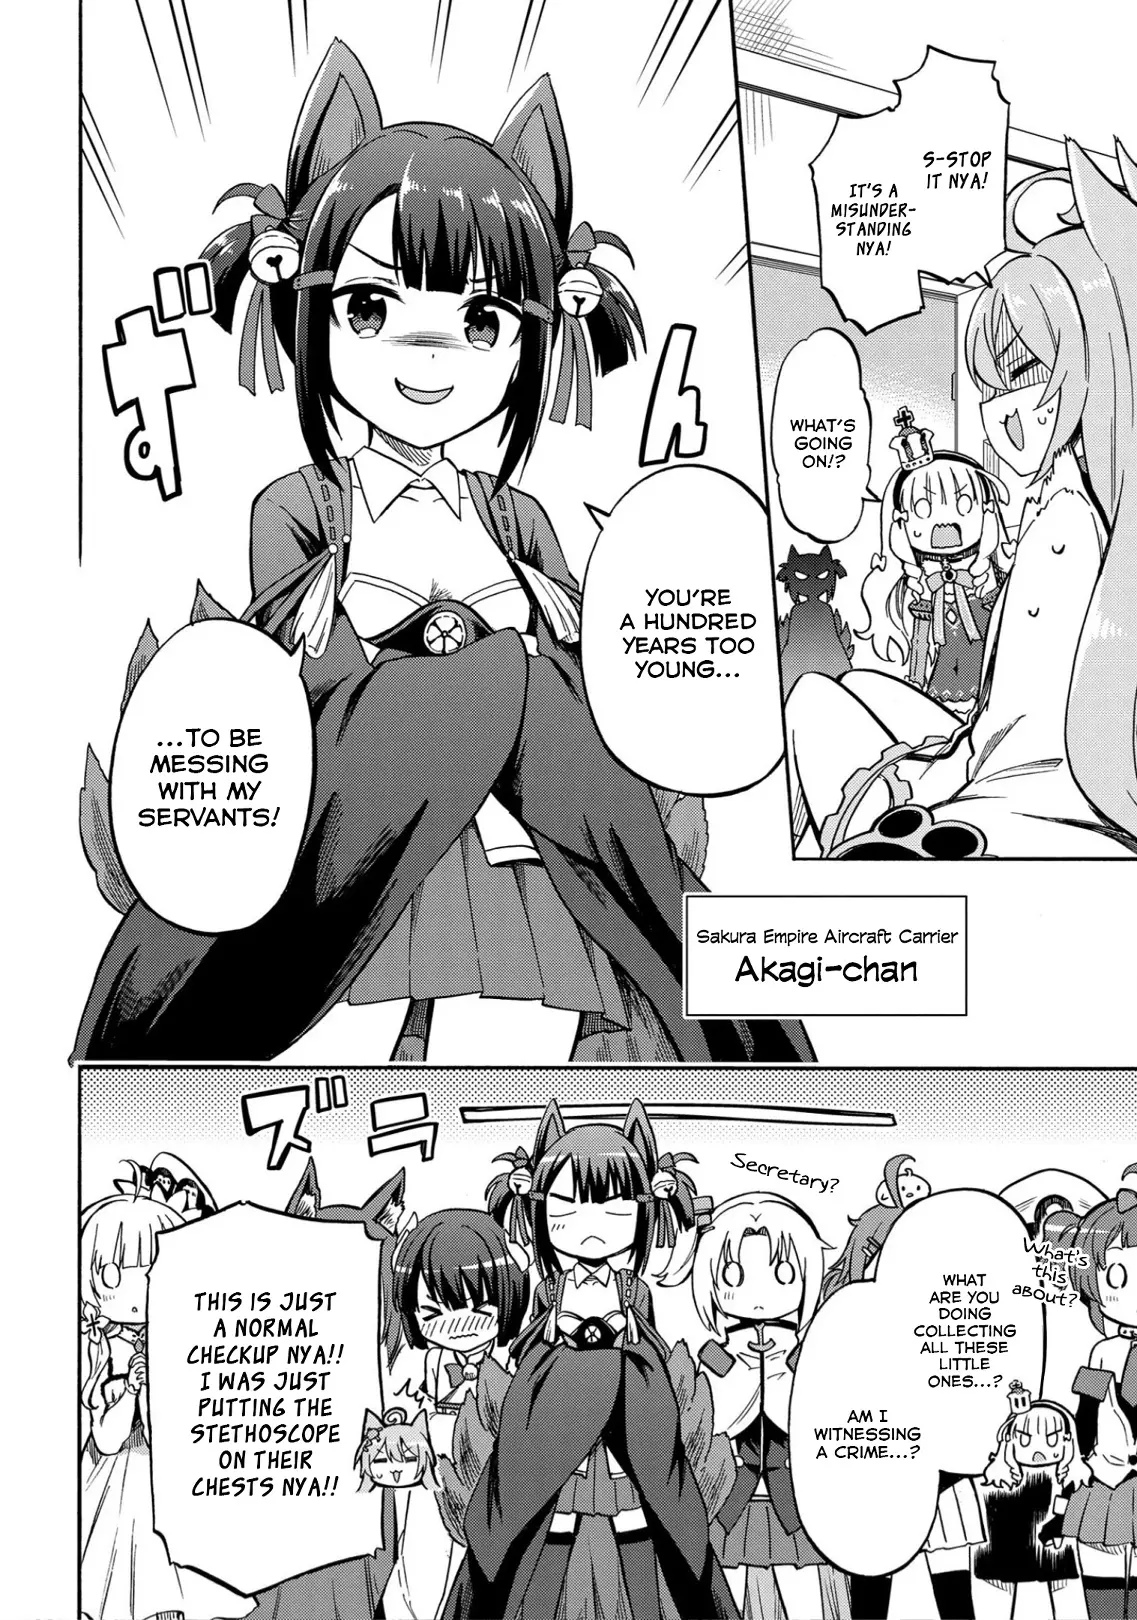 Azur Lane: Queen's Orders - 153 page 2-83977eb5